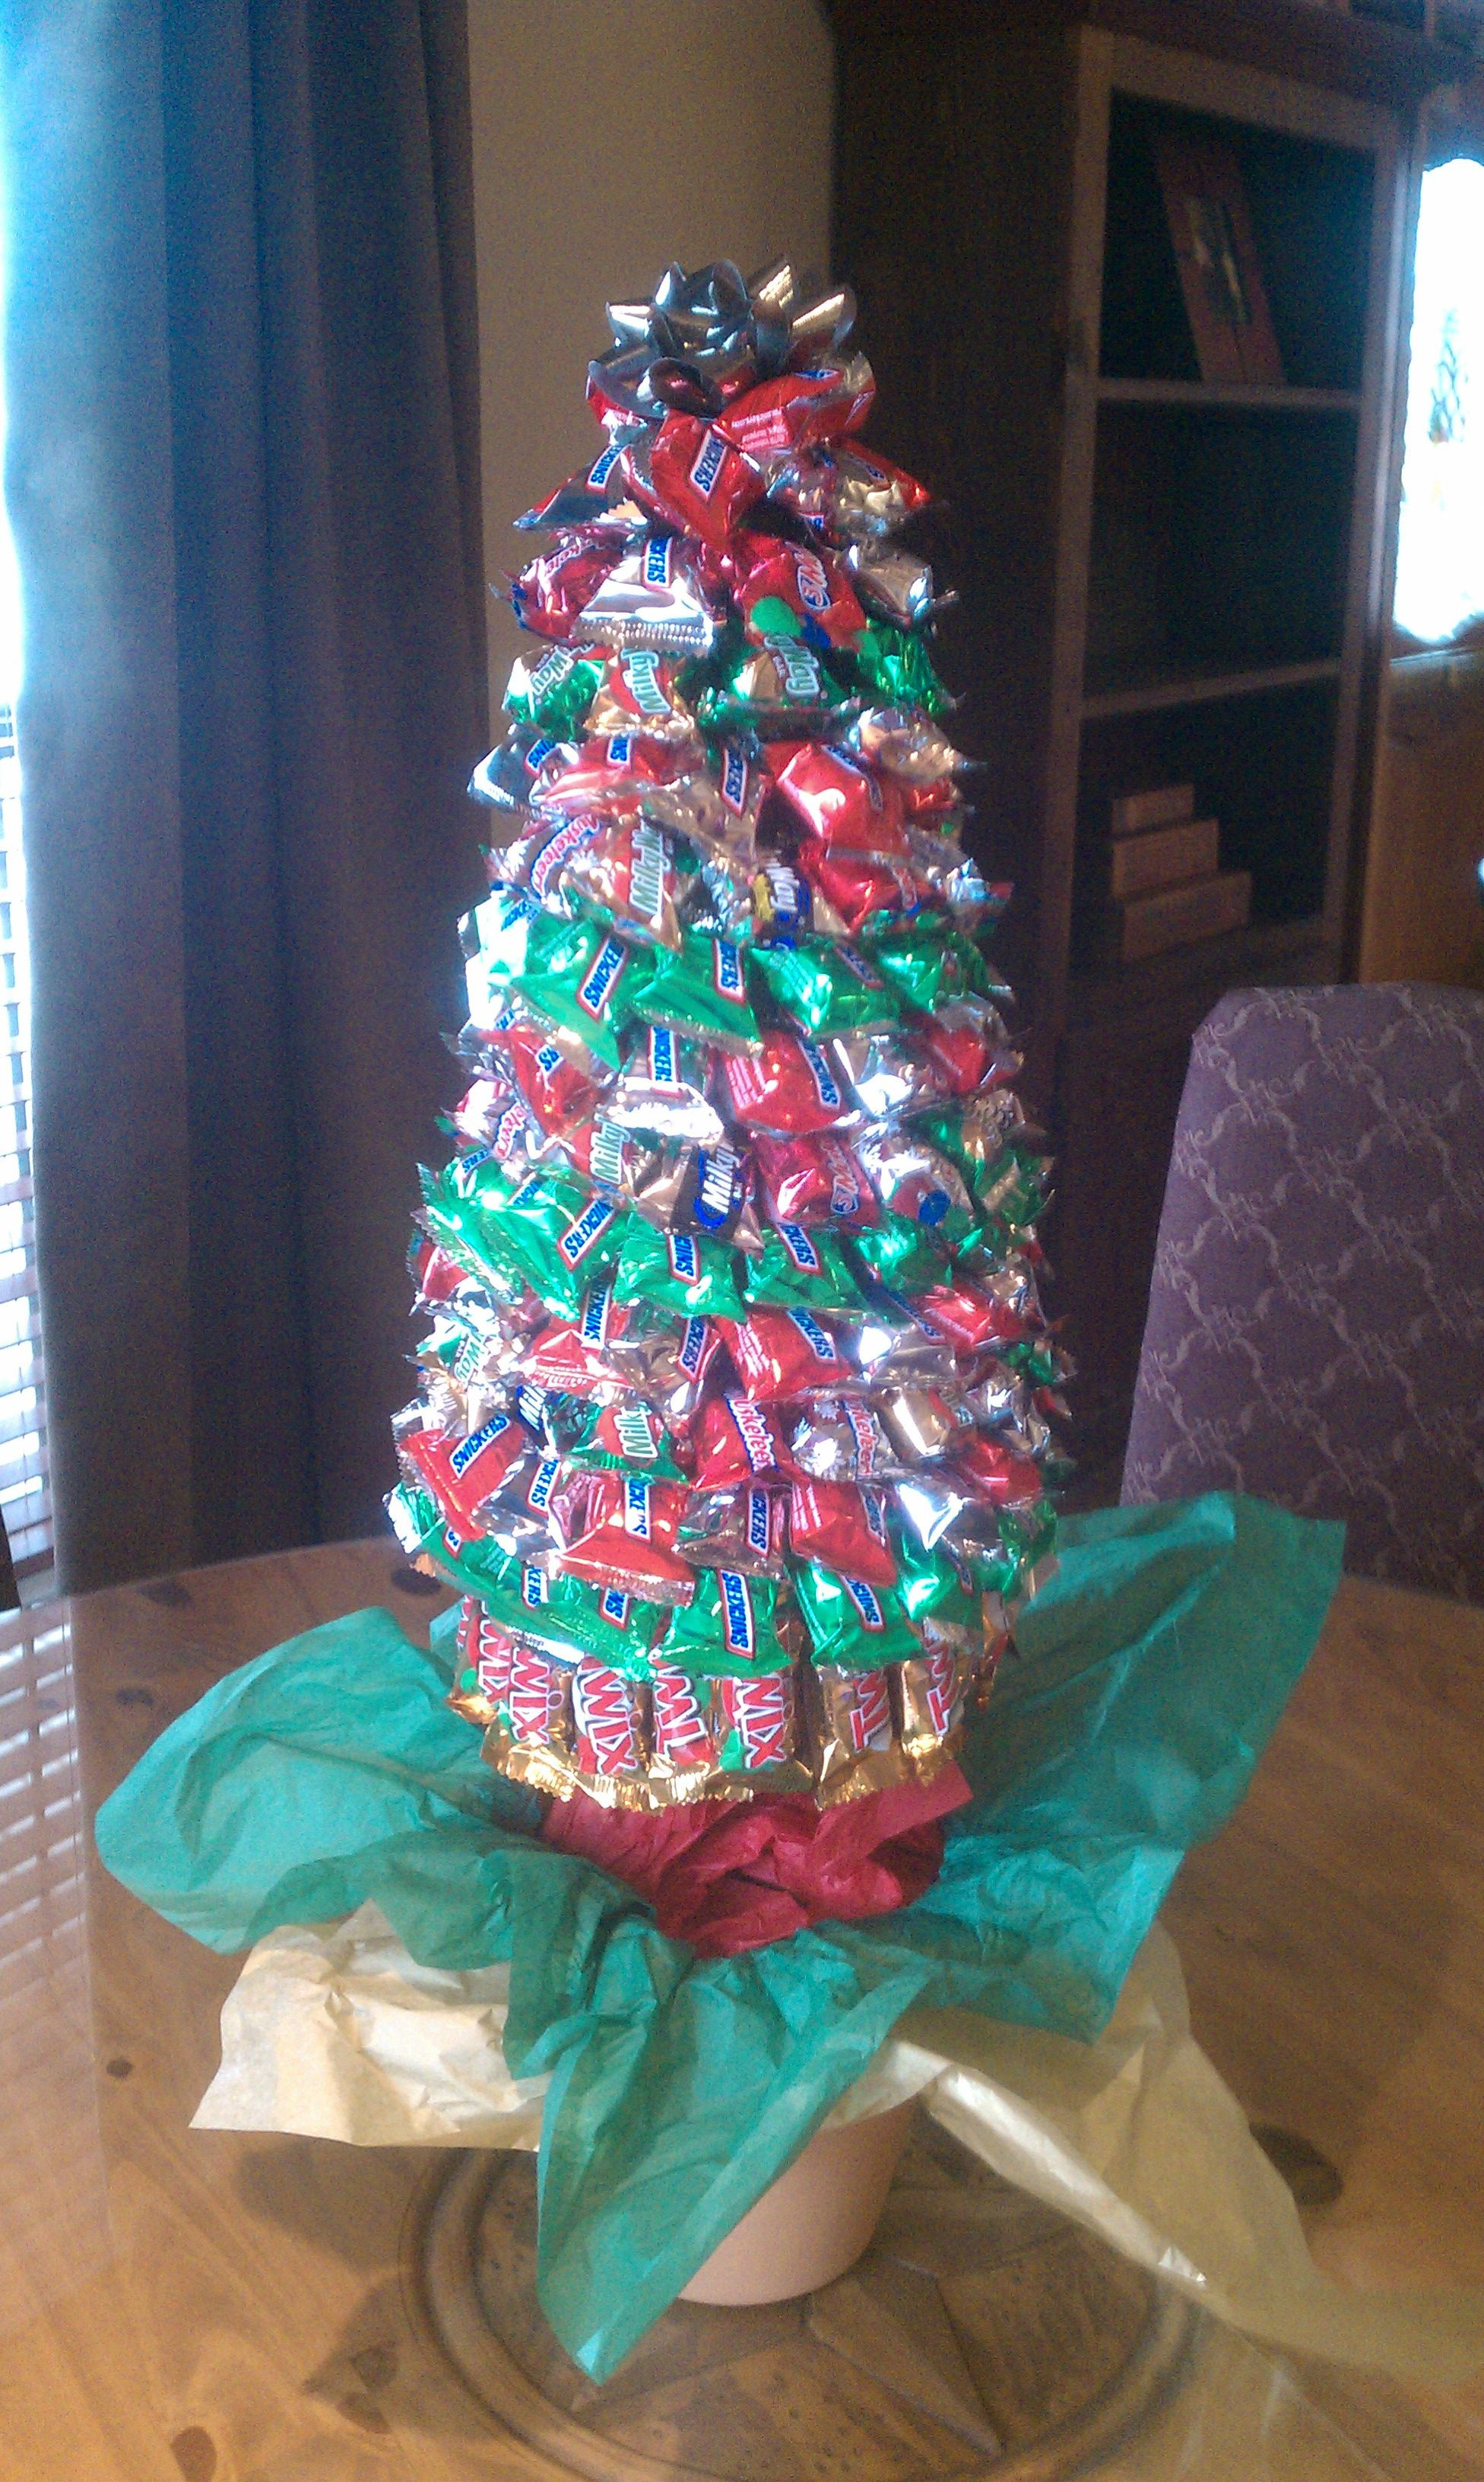 Candy Christmas Tree Craft
 Lori s Christmas Candy Tree crafts